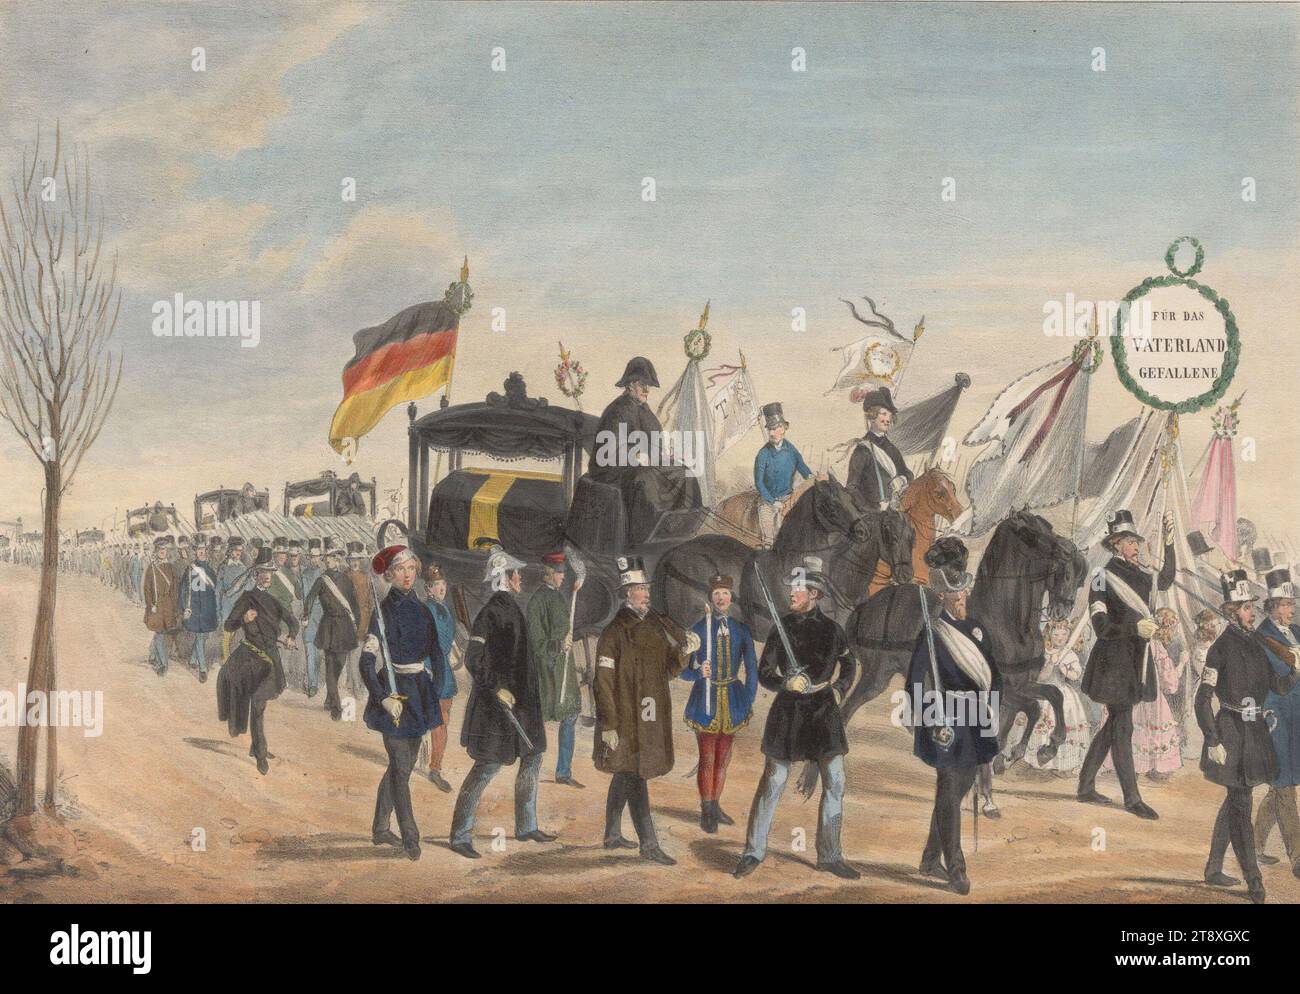 Funeral of the March Fallen on 17. March 1848 ('DIE EHRE DER TODTEN.'), Johann Lanzedelli, lithographer, Johann Höfelich (1796-1849), Printer, 1848, paper, colorised, chalk-manner lithograph, height 25, 6 cm, width 36, 1 cm, Fine Arts, Revolutions of 1848, 1849, Disease and Death, cortege, funeral procession, public funeral, The Vienna Collection Stock Photo